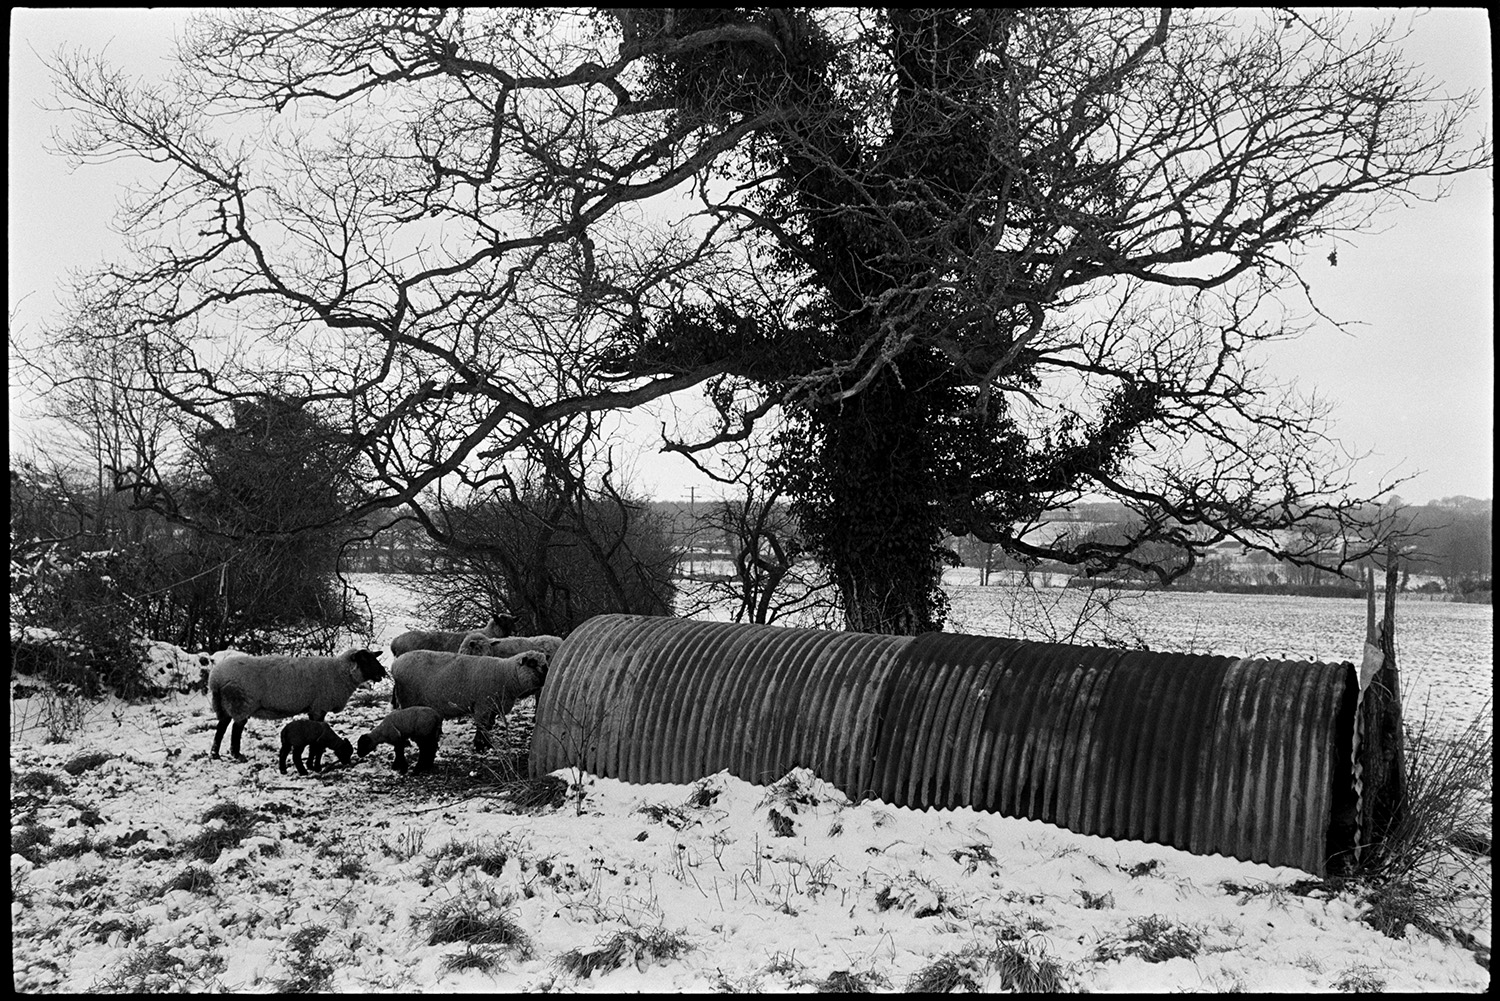 Snow, collapsing cob and thatch barns.
[Sheep and lambs entering a corrugated iron shelter in front of a large tree in a field covered in snow at Middle Week, Iddesleigh,]